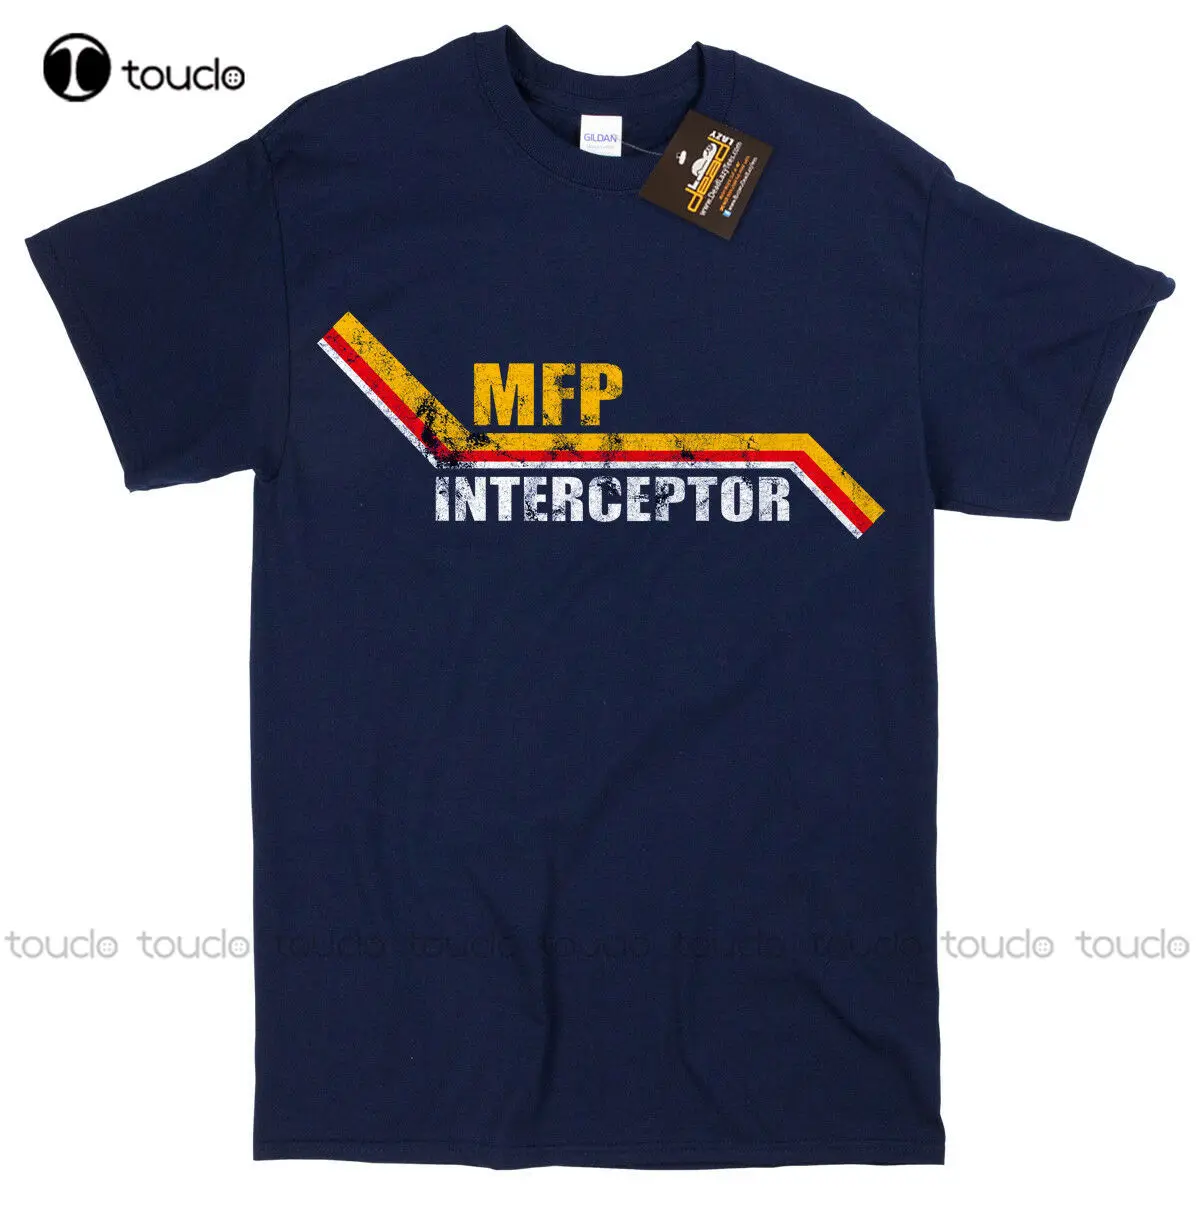 

Mad Max Mfp Interceptor Movie Inspired T Shirt V8 Car Pursuit Navy Blue New Fashion Hot Summer Funny Casual Tops T Shirts